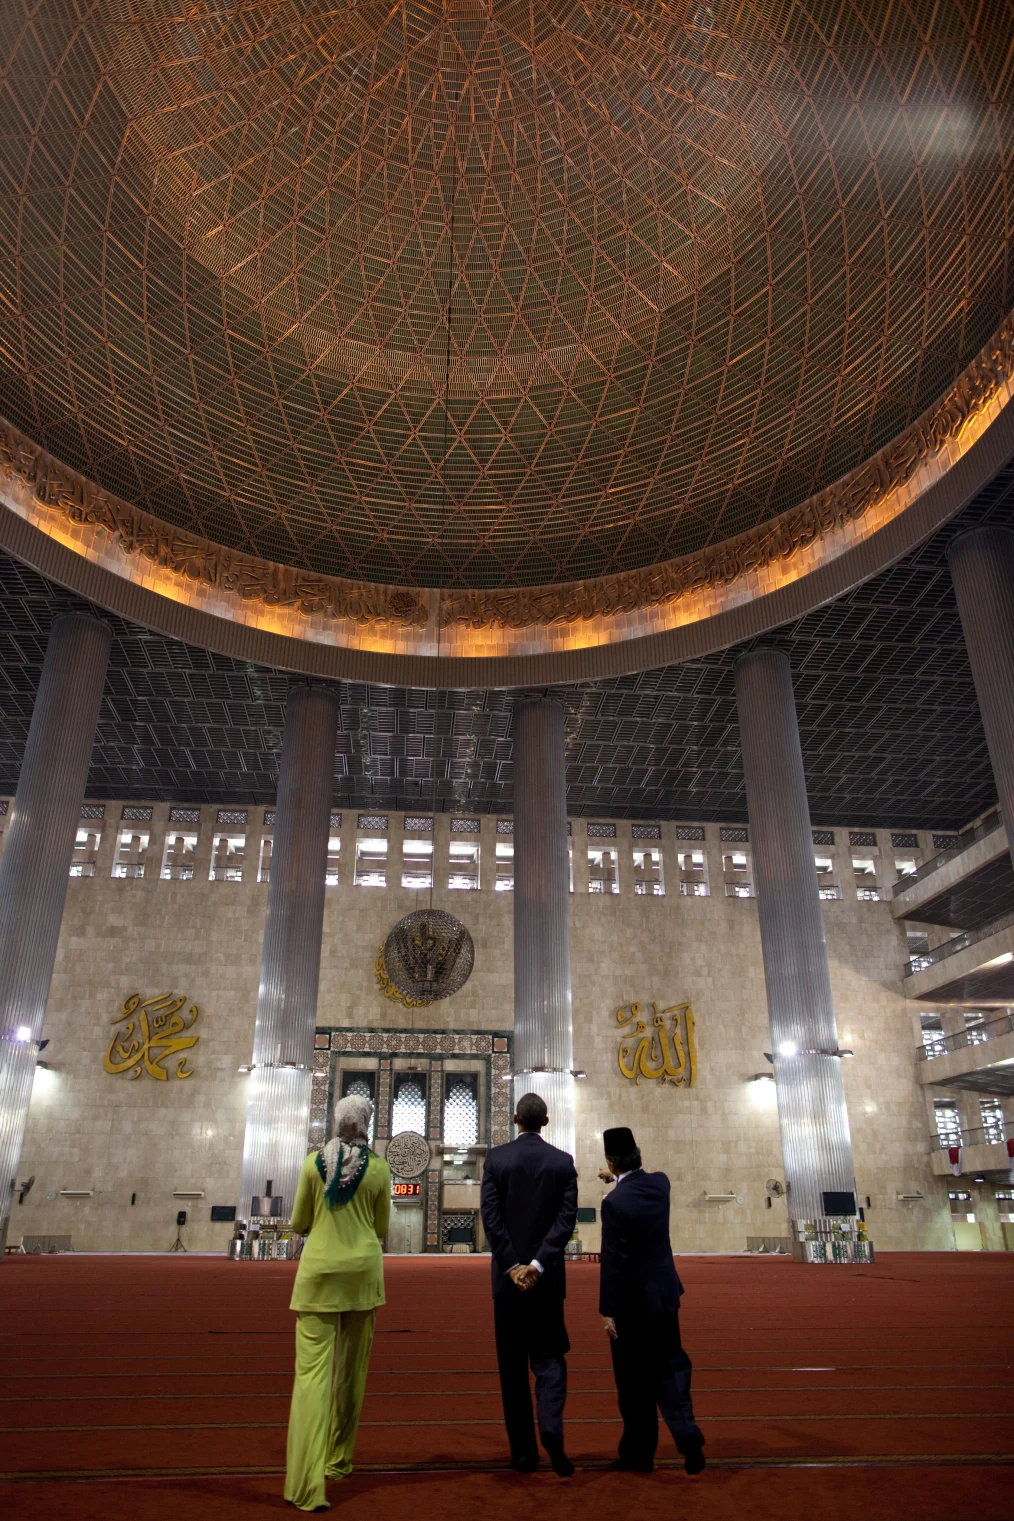 President Barack Obama and First Lady Michelle Obama visit the main prayer hall during a tour of the Istiqlal Mosque with Grand Imam Ali Mustafa Yaqub in Jakarta, Indonesia, Nov. 10, 2010. (Official White House Photo by Pete Souza)

This official White Hou